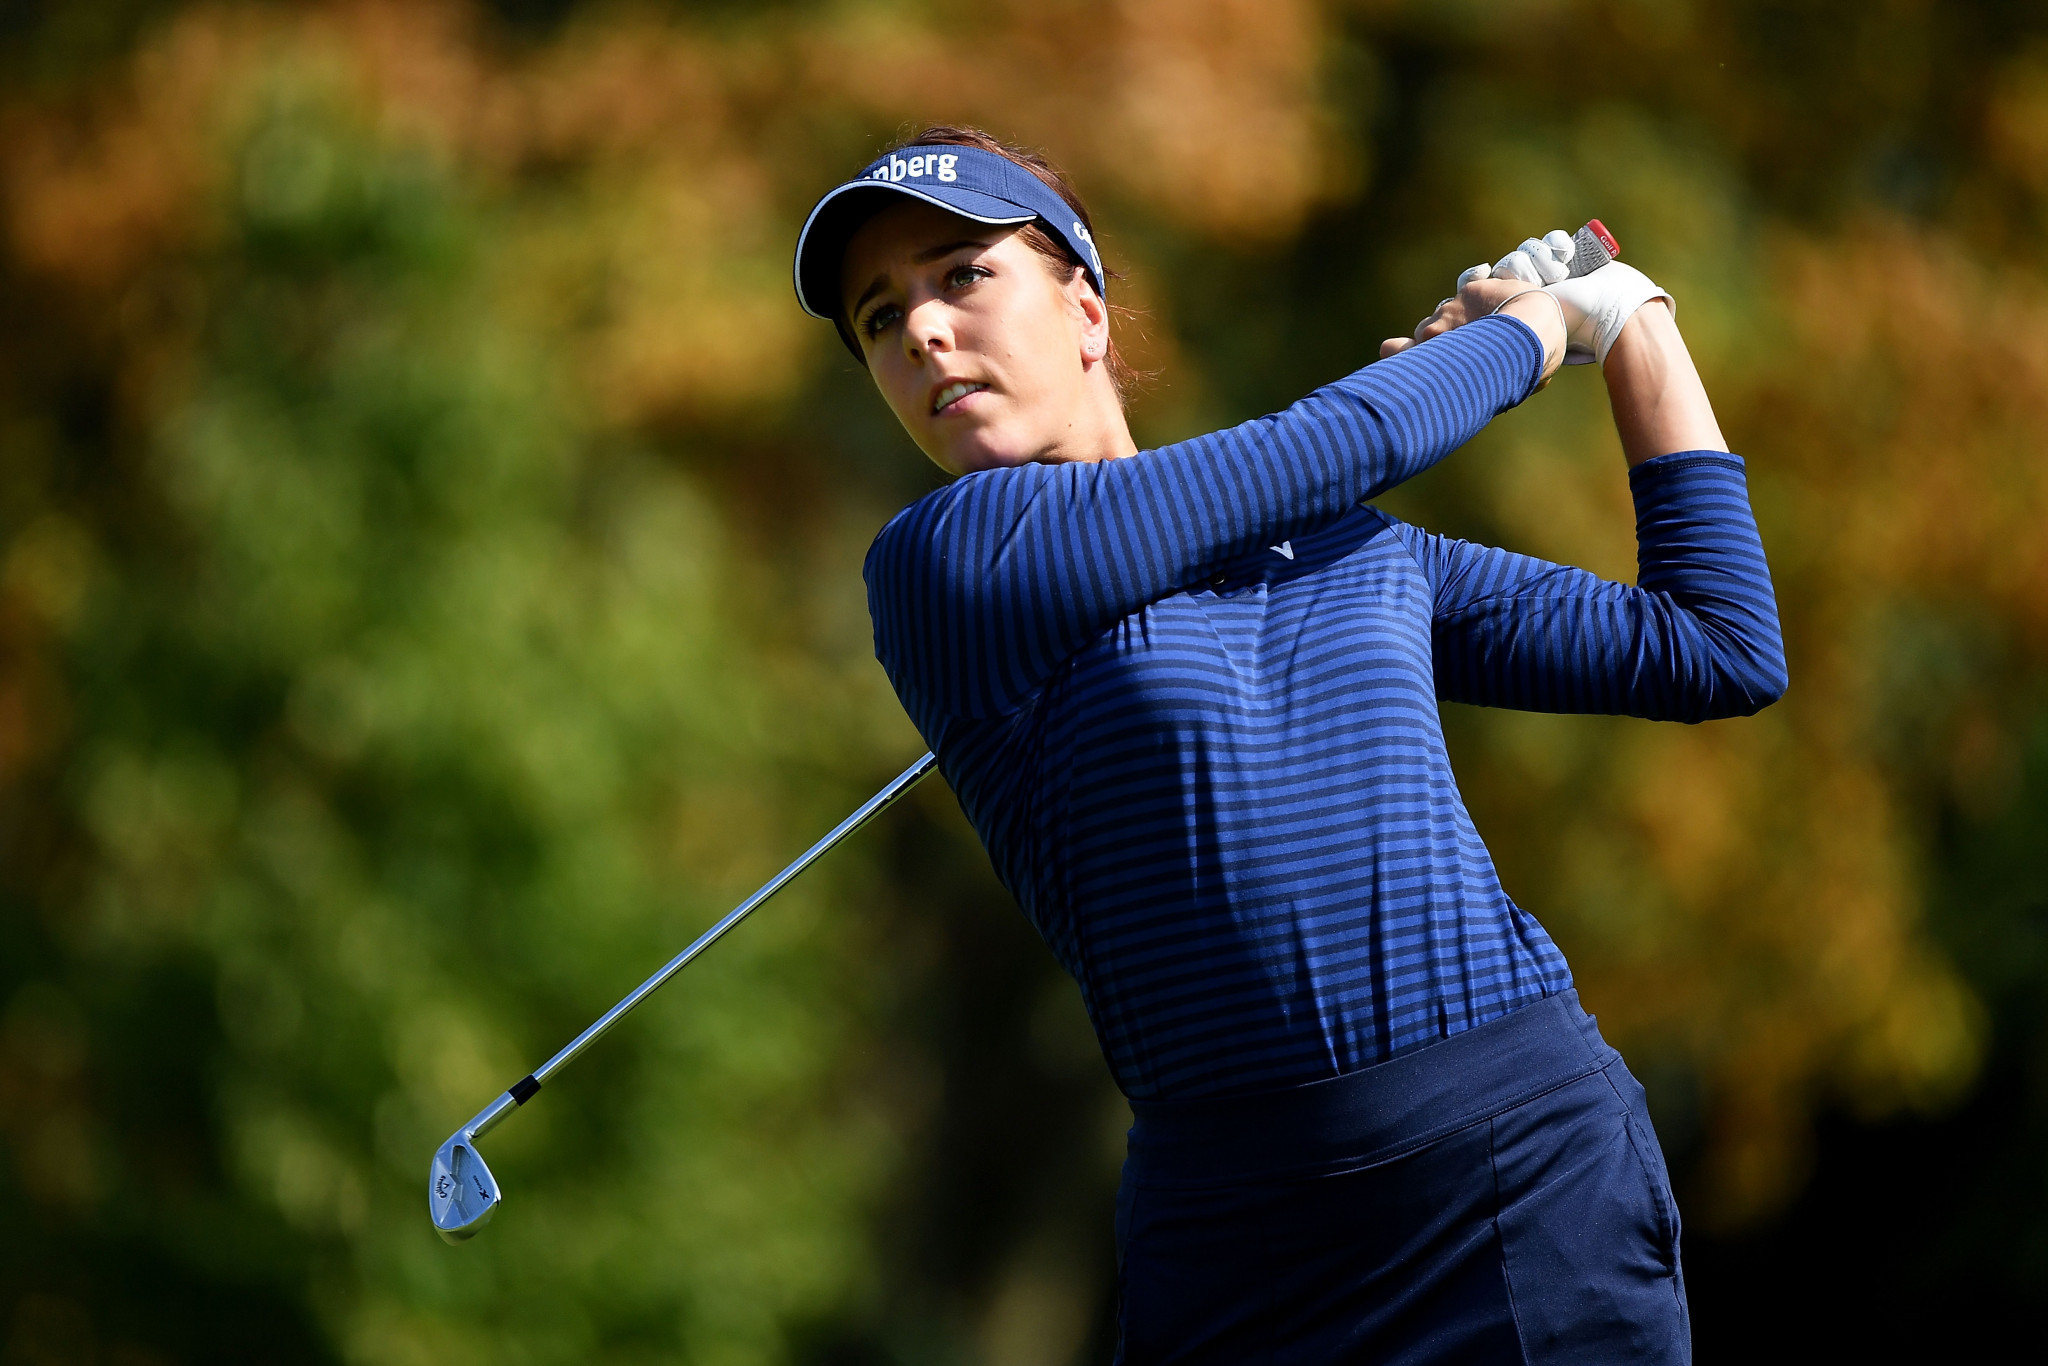 Georgia Hall will require all of her experience on the final day of the Solheim Cup ©Getty Images